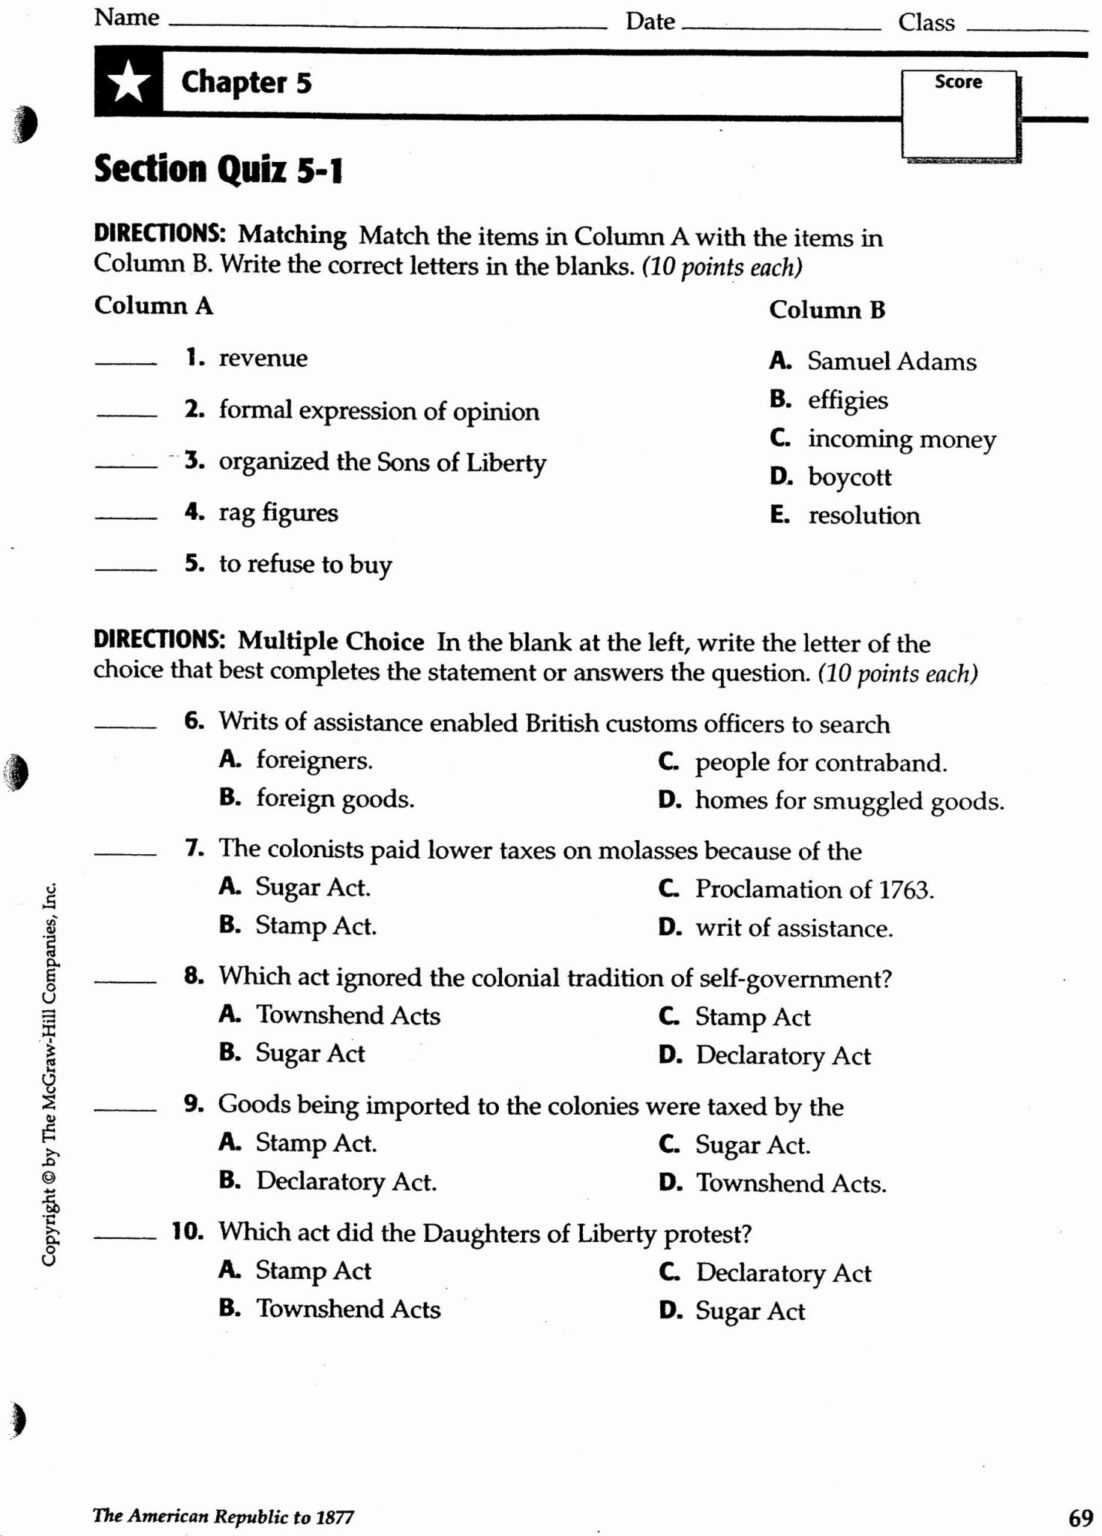 changing-the-constitution-worksheet-answers-icivics-anatomy-worksheets